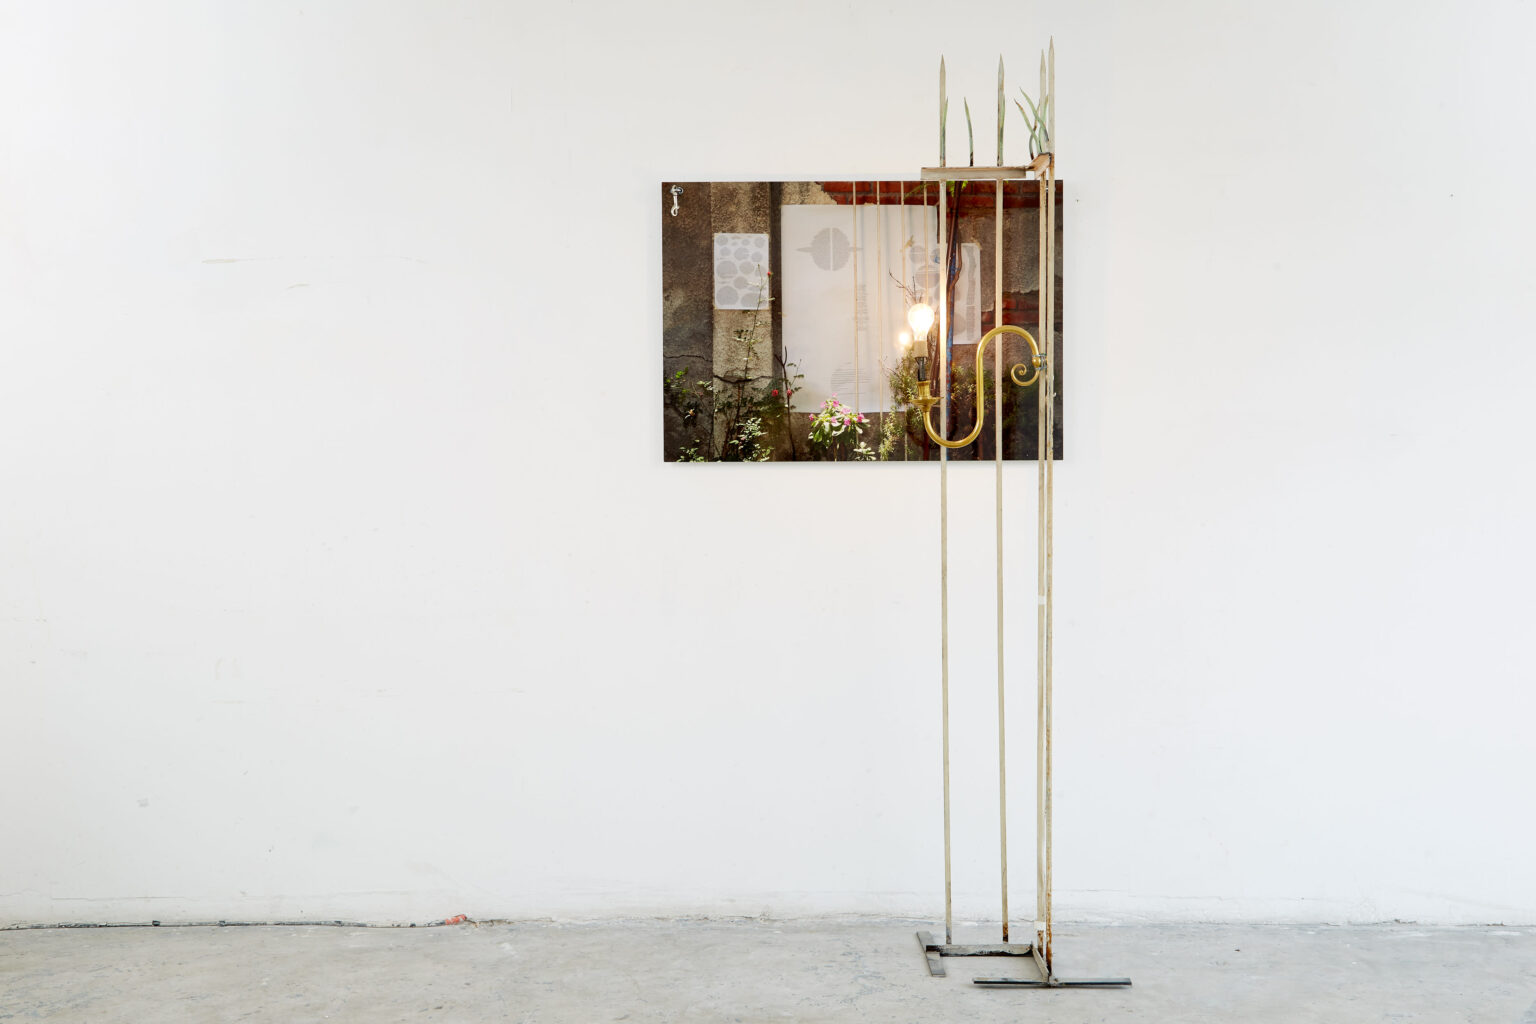 Redemption and participation of fences and flowers, 2013